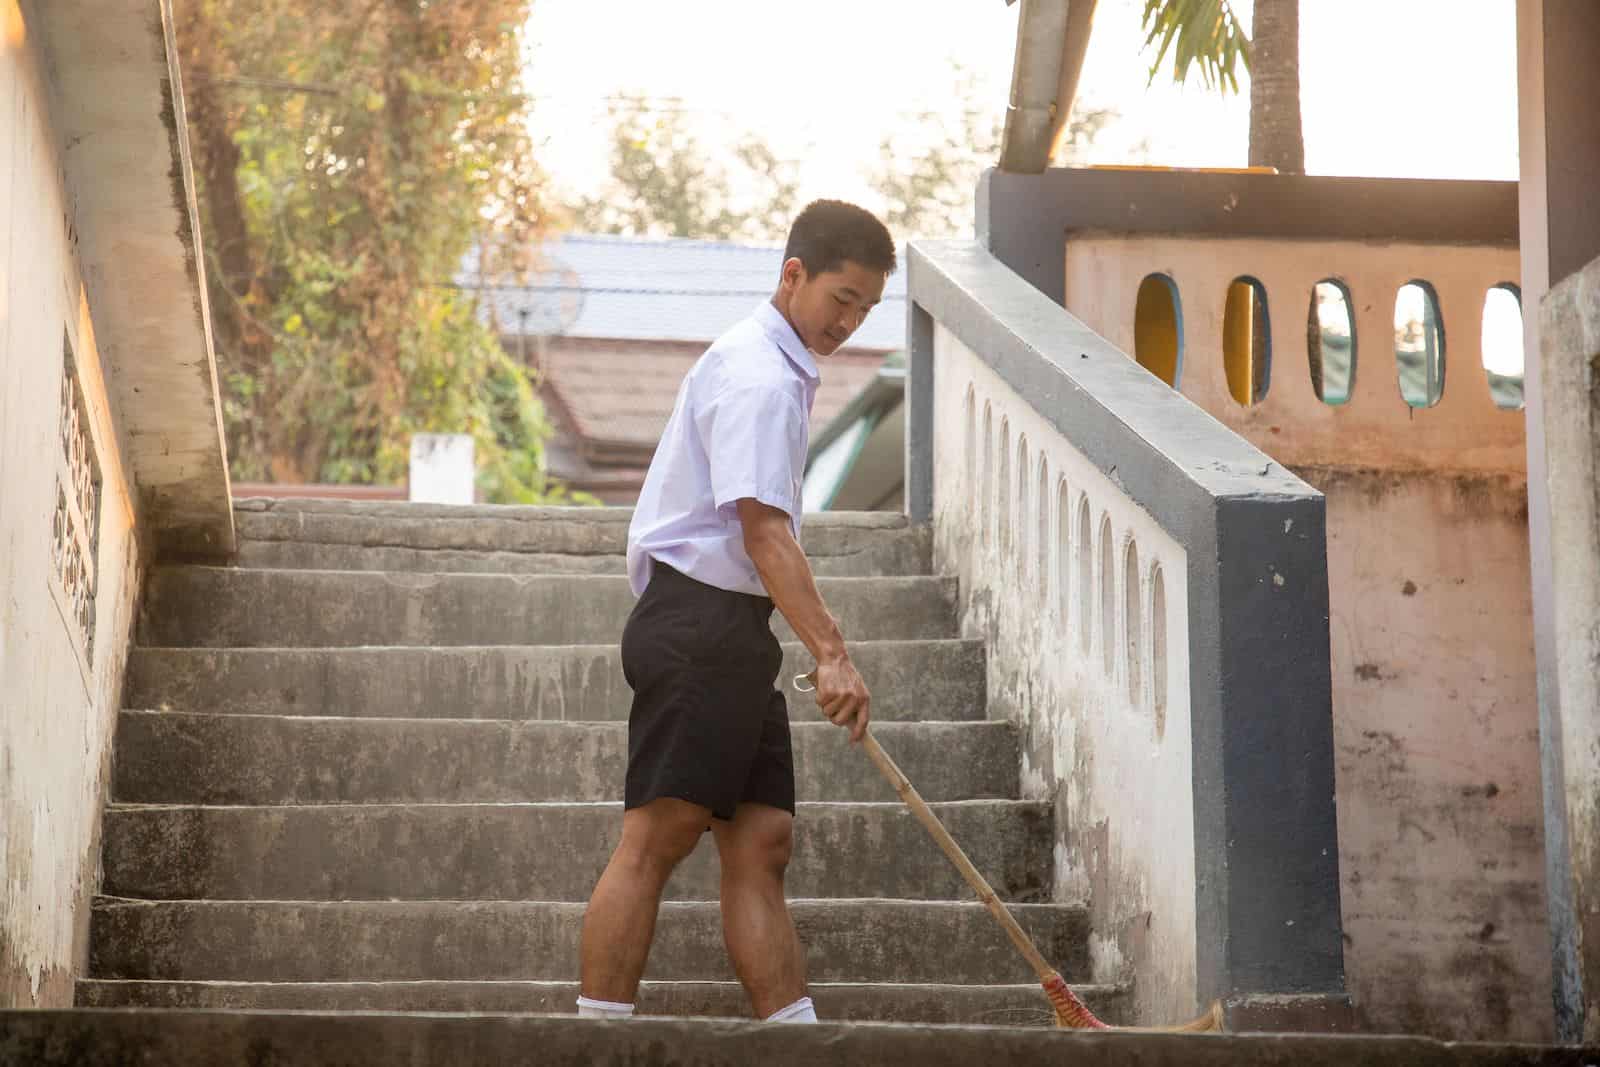 A boy sweeps the stairs outside at a concrete building with trees in the background.